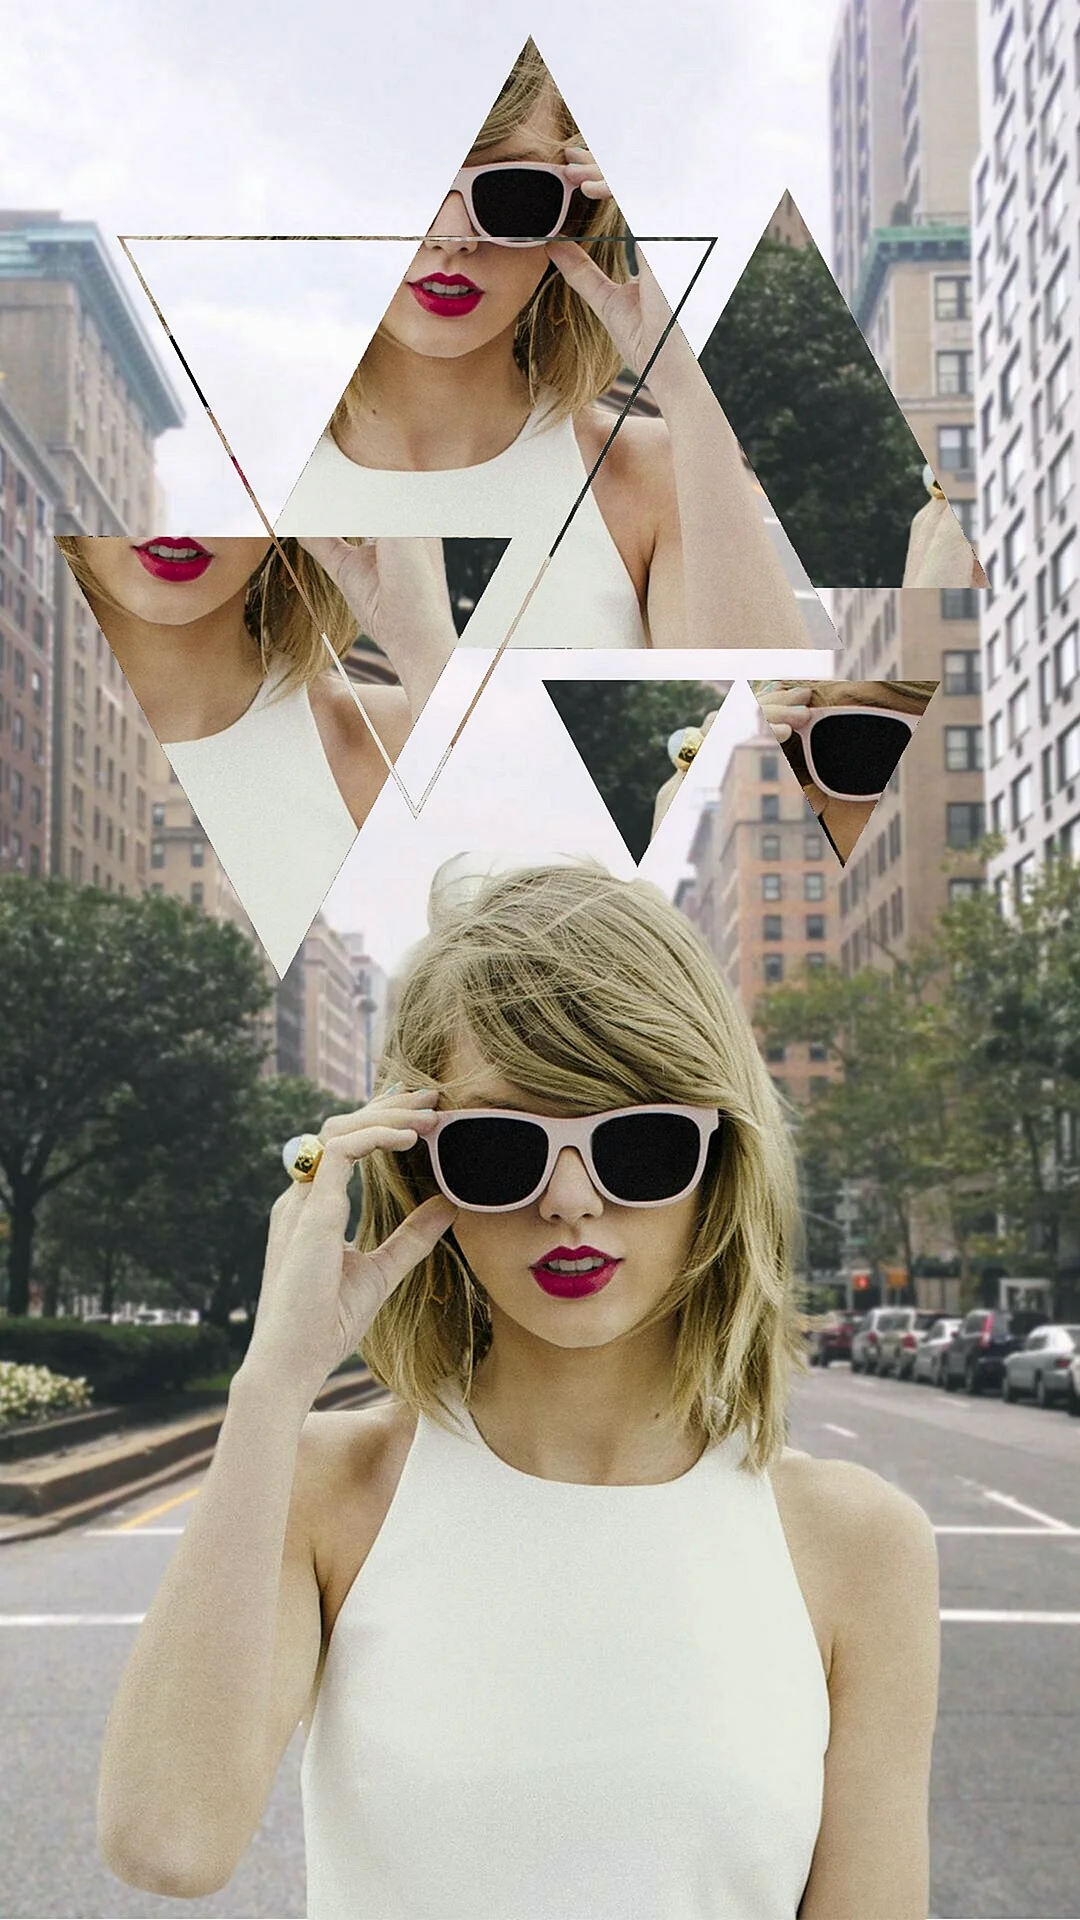 Taylor Swift 1989 Wallpaper For iPhone